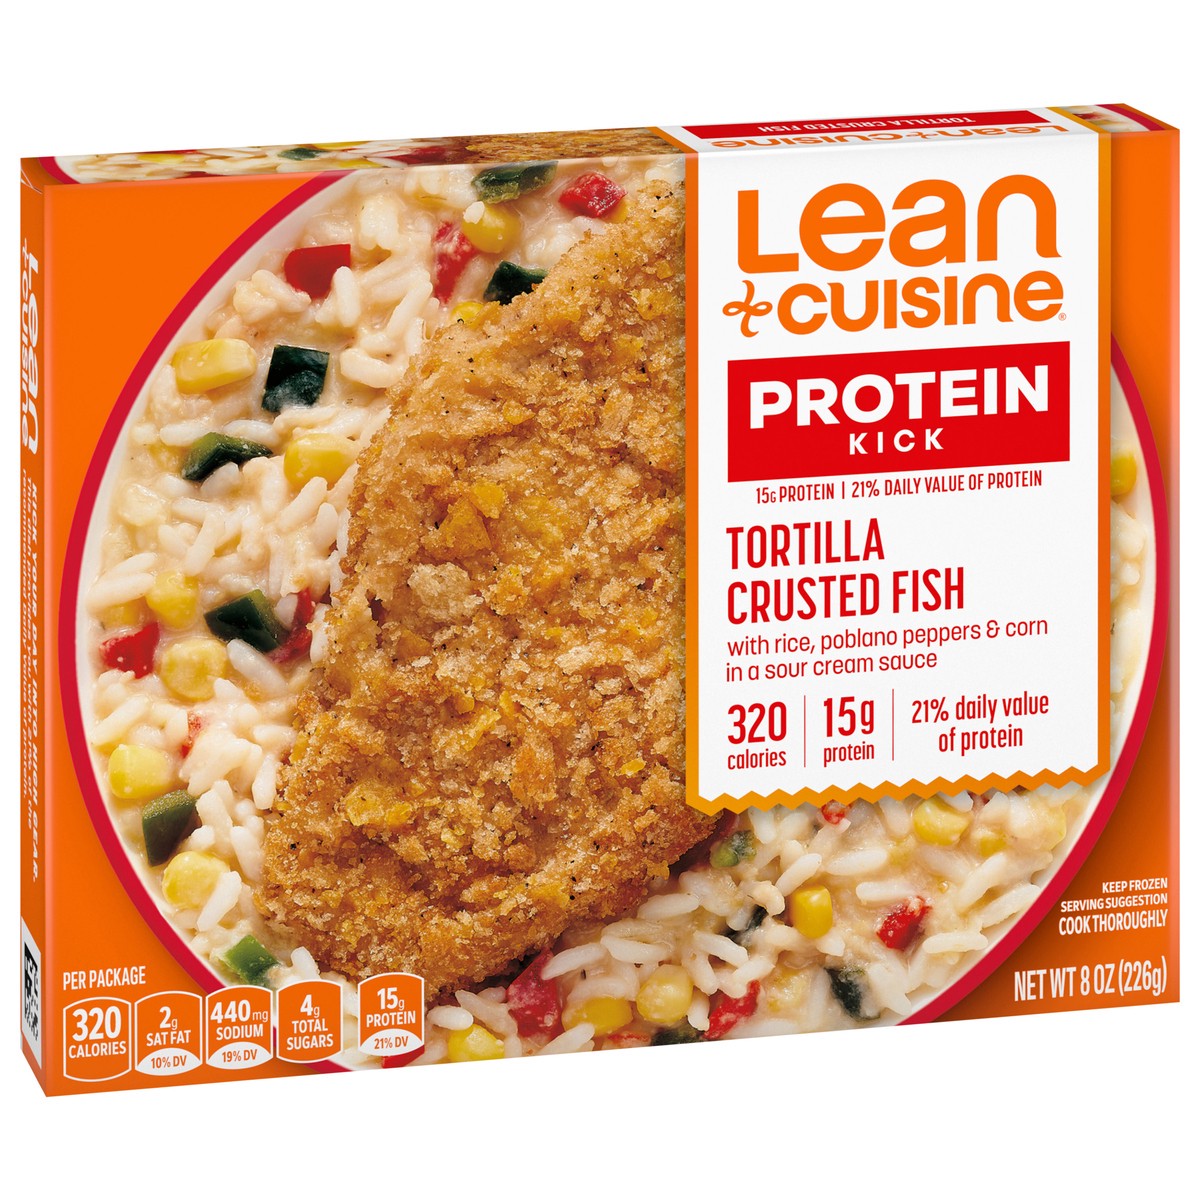 slide 2 of 9, Lean Cuisine Frozen Meal Tortilla Crusted Fish, Protein Kick Microwave Meal, Microwave Fish Dinner, Frozen Dinner for One, 8 oz